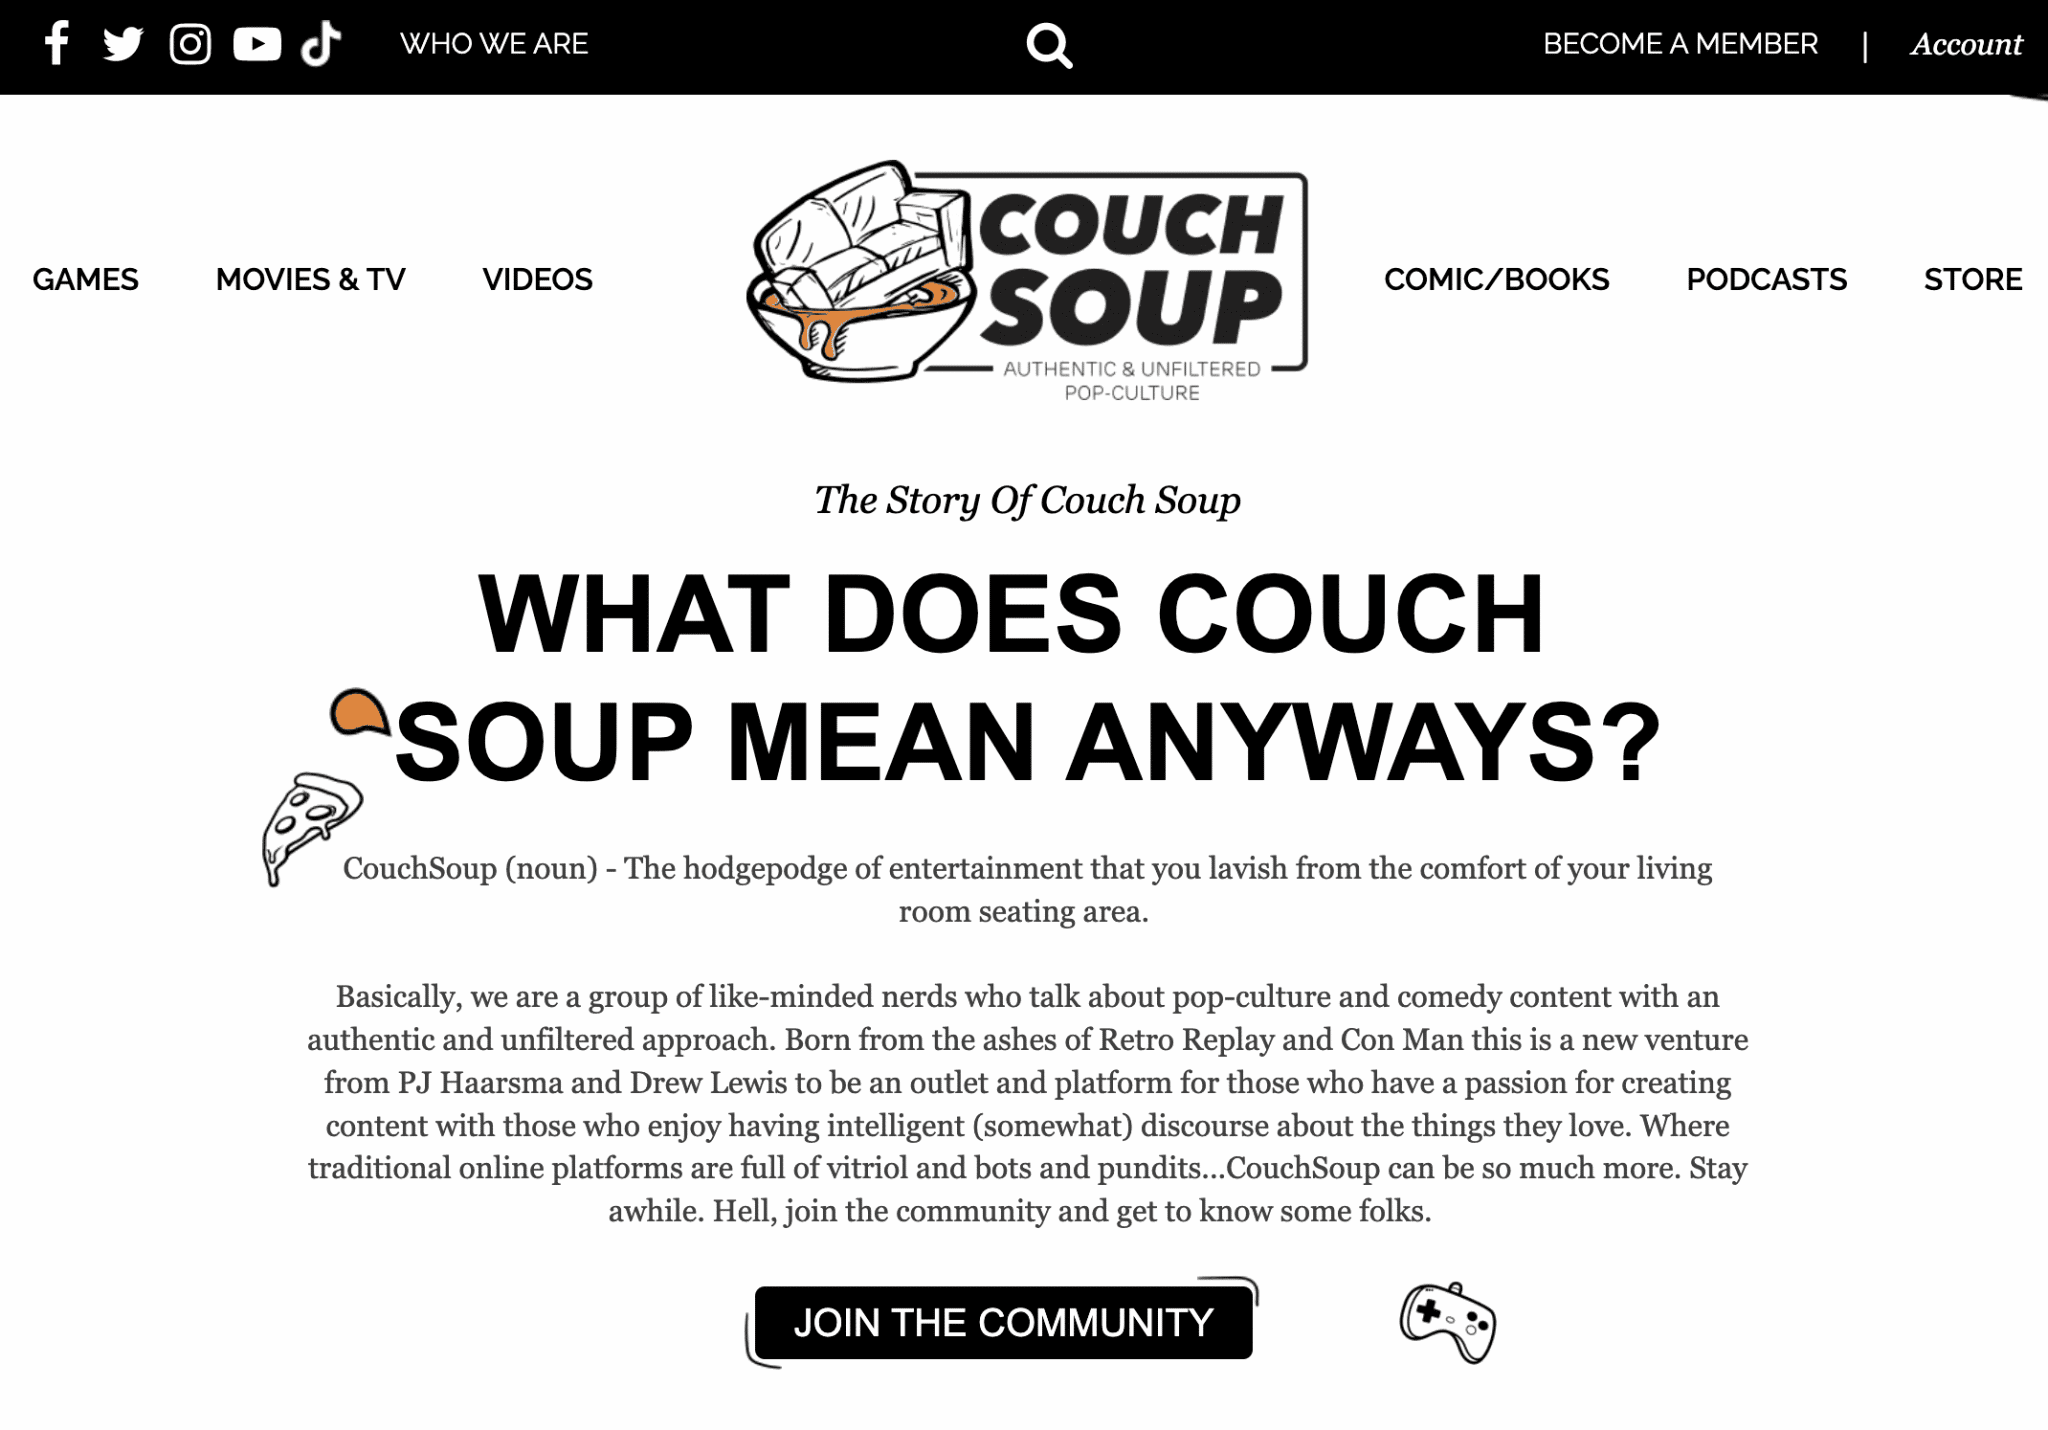 Couch Soup  Authentic and Unfiltered Opinions on Pop Culture